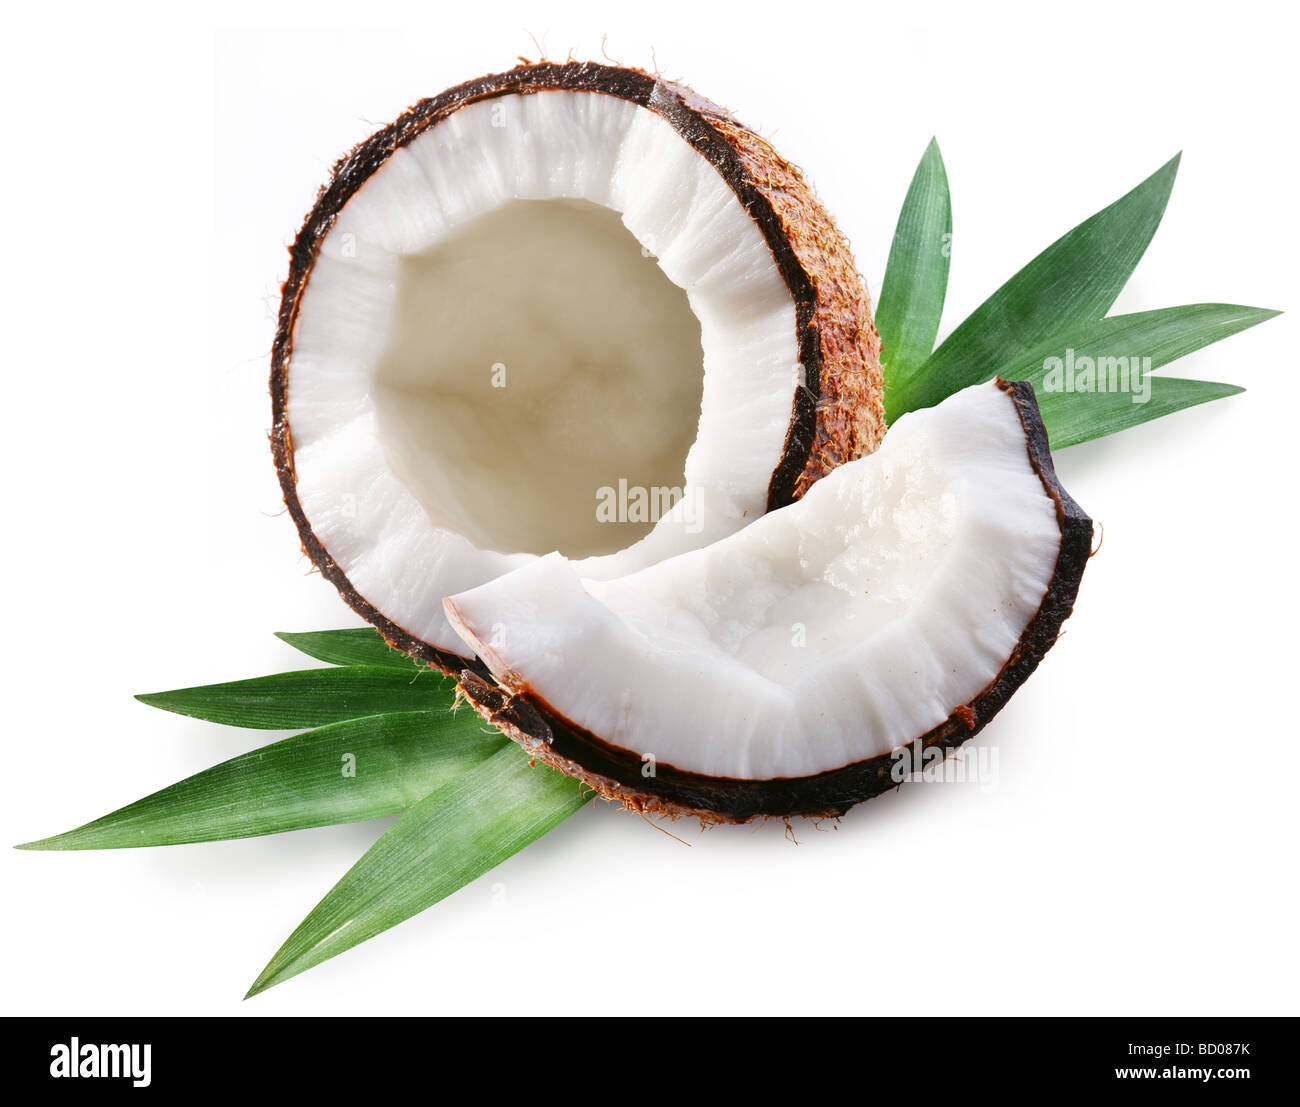 coconut on a white background Stock Photo